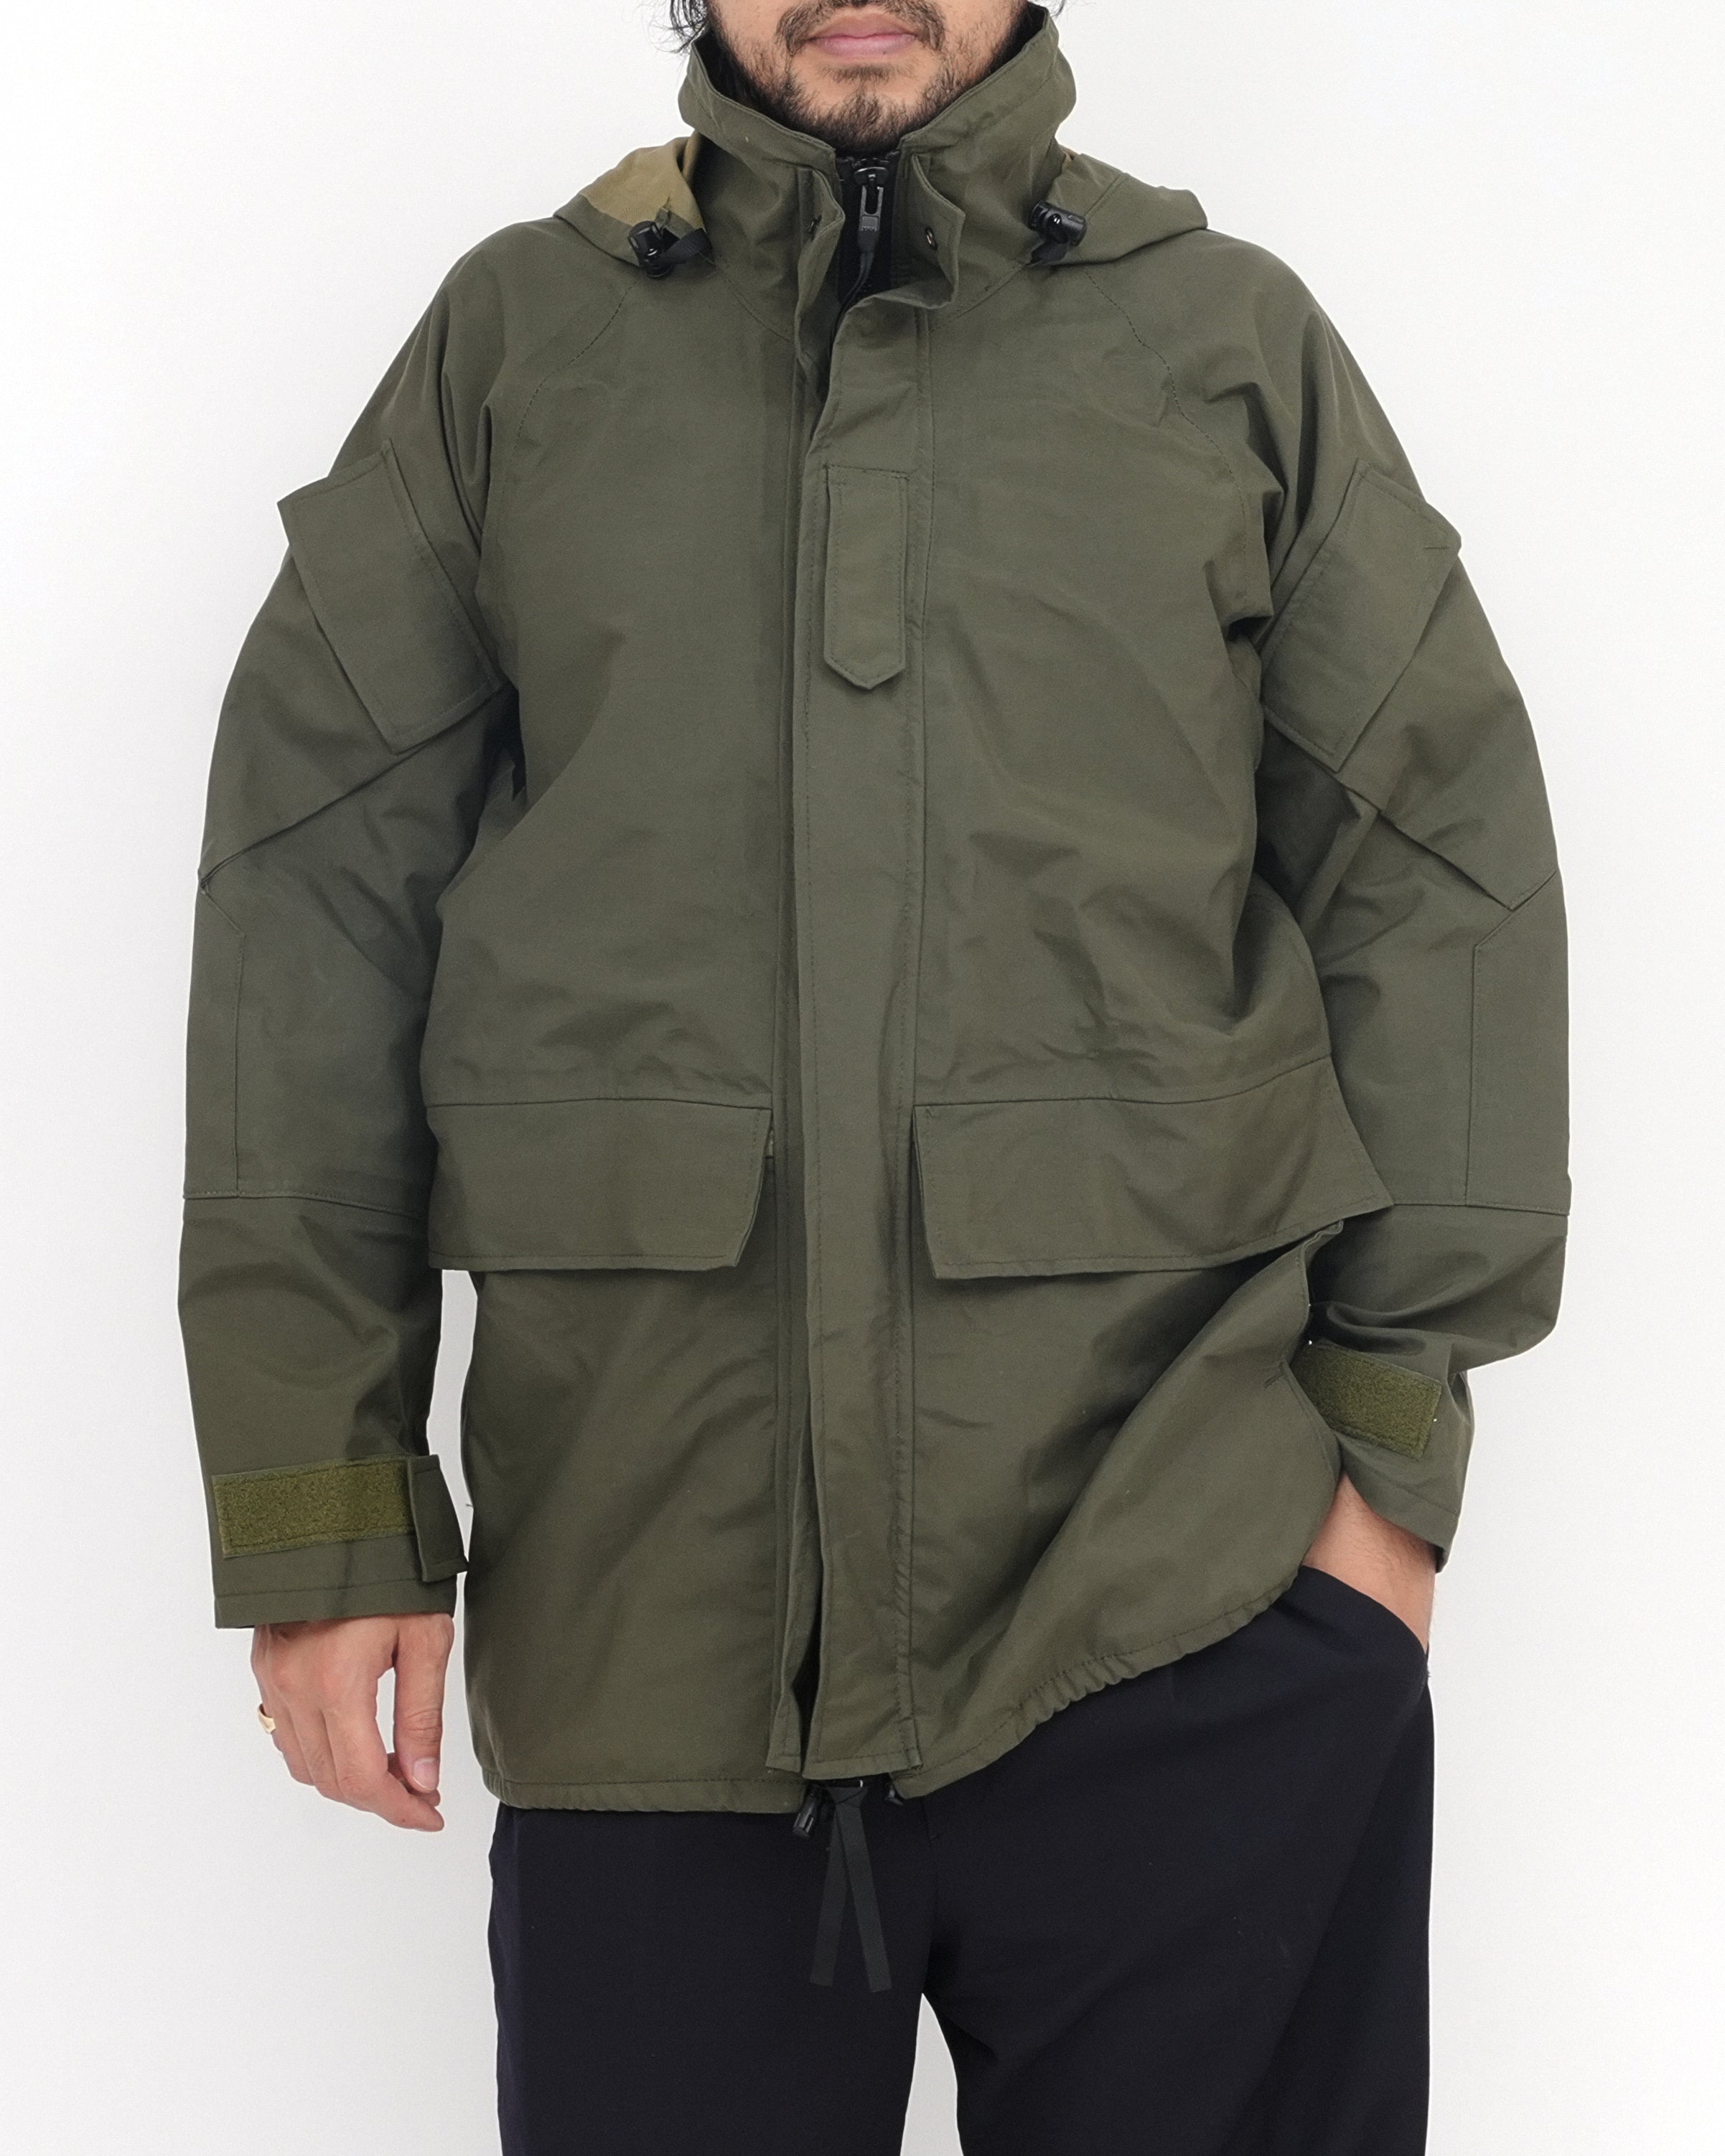 ECWCS GENII GORE-TEX COLD WEATHER PARKAマウンテンリサーチ